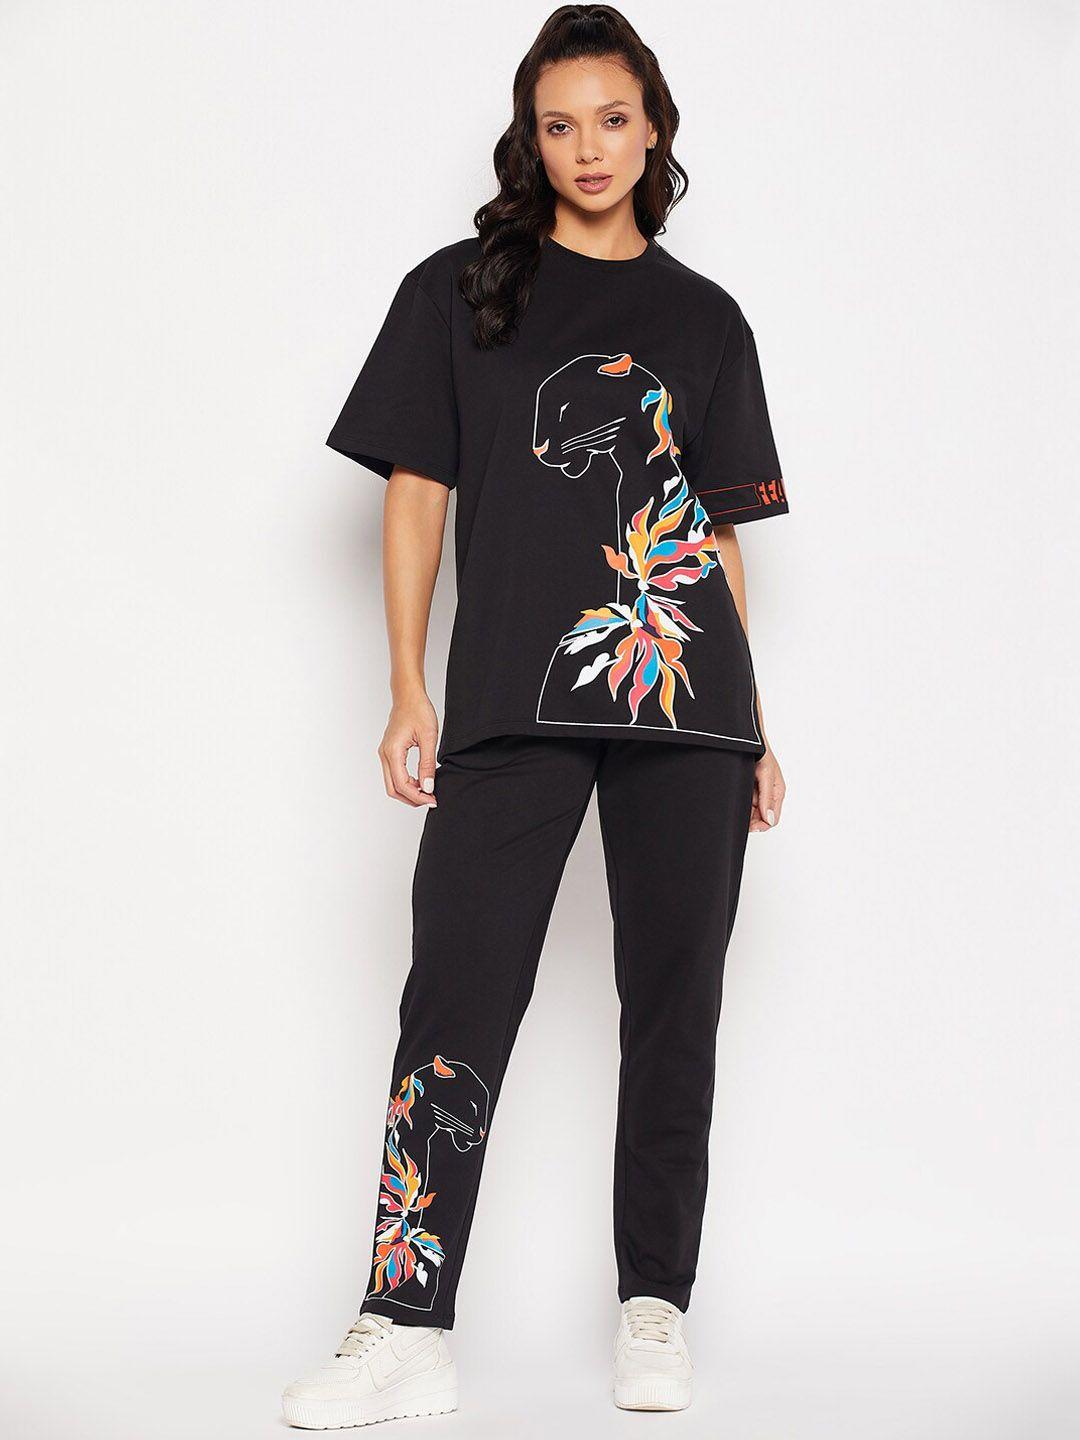 edrio floral lion printed pure cotton t-shirt with trousers co-ords